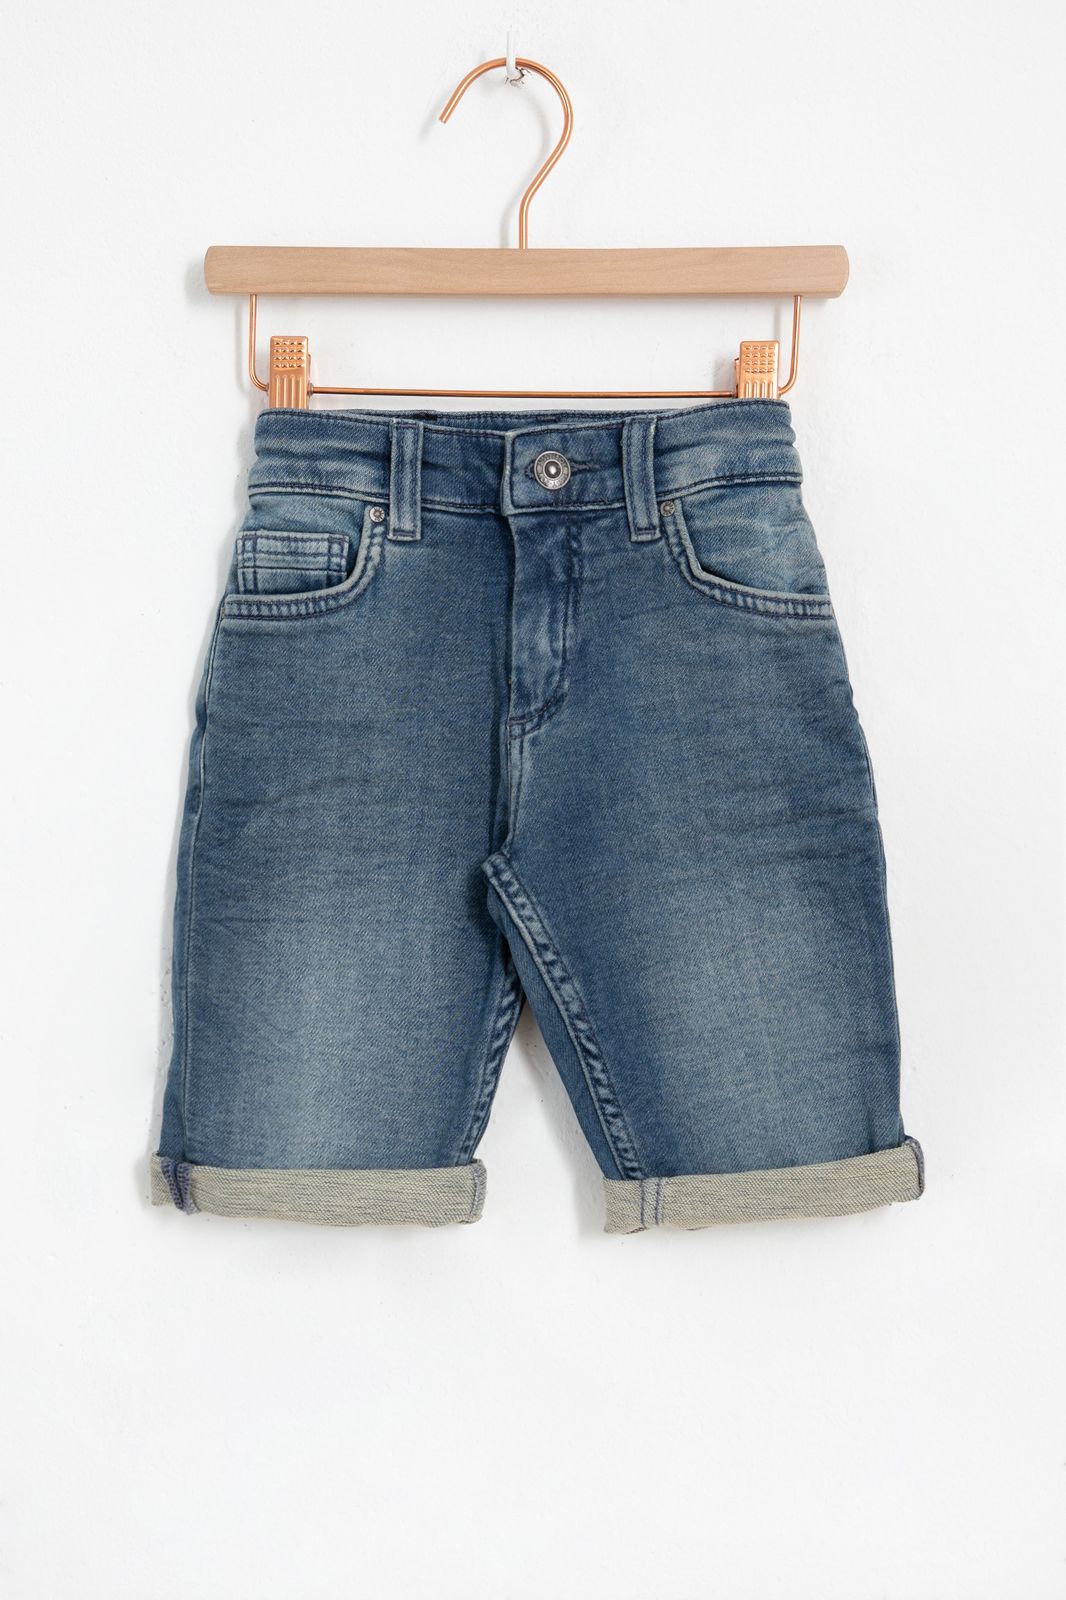 Mid blue jeans shorts